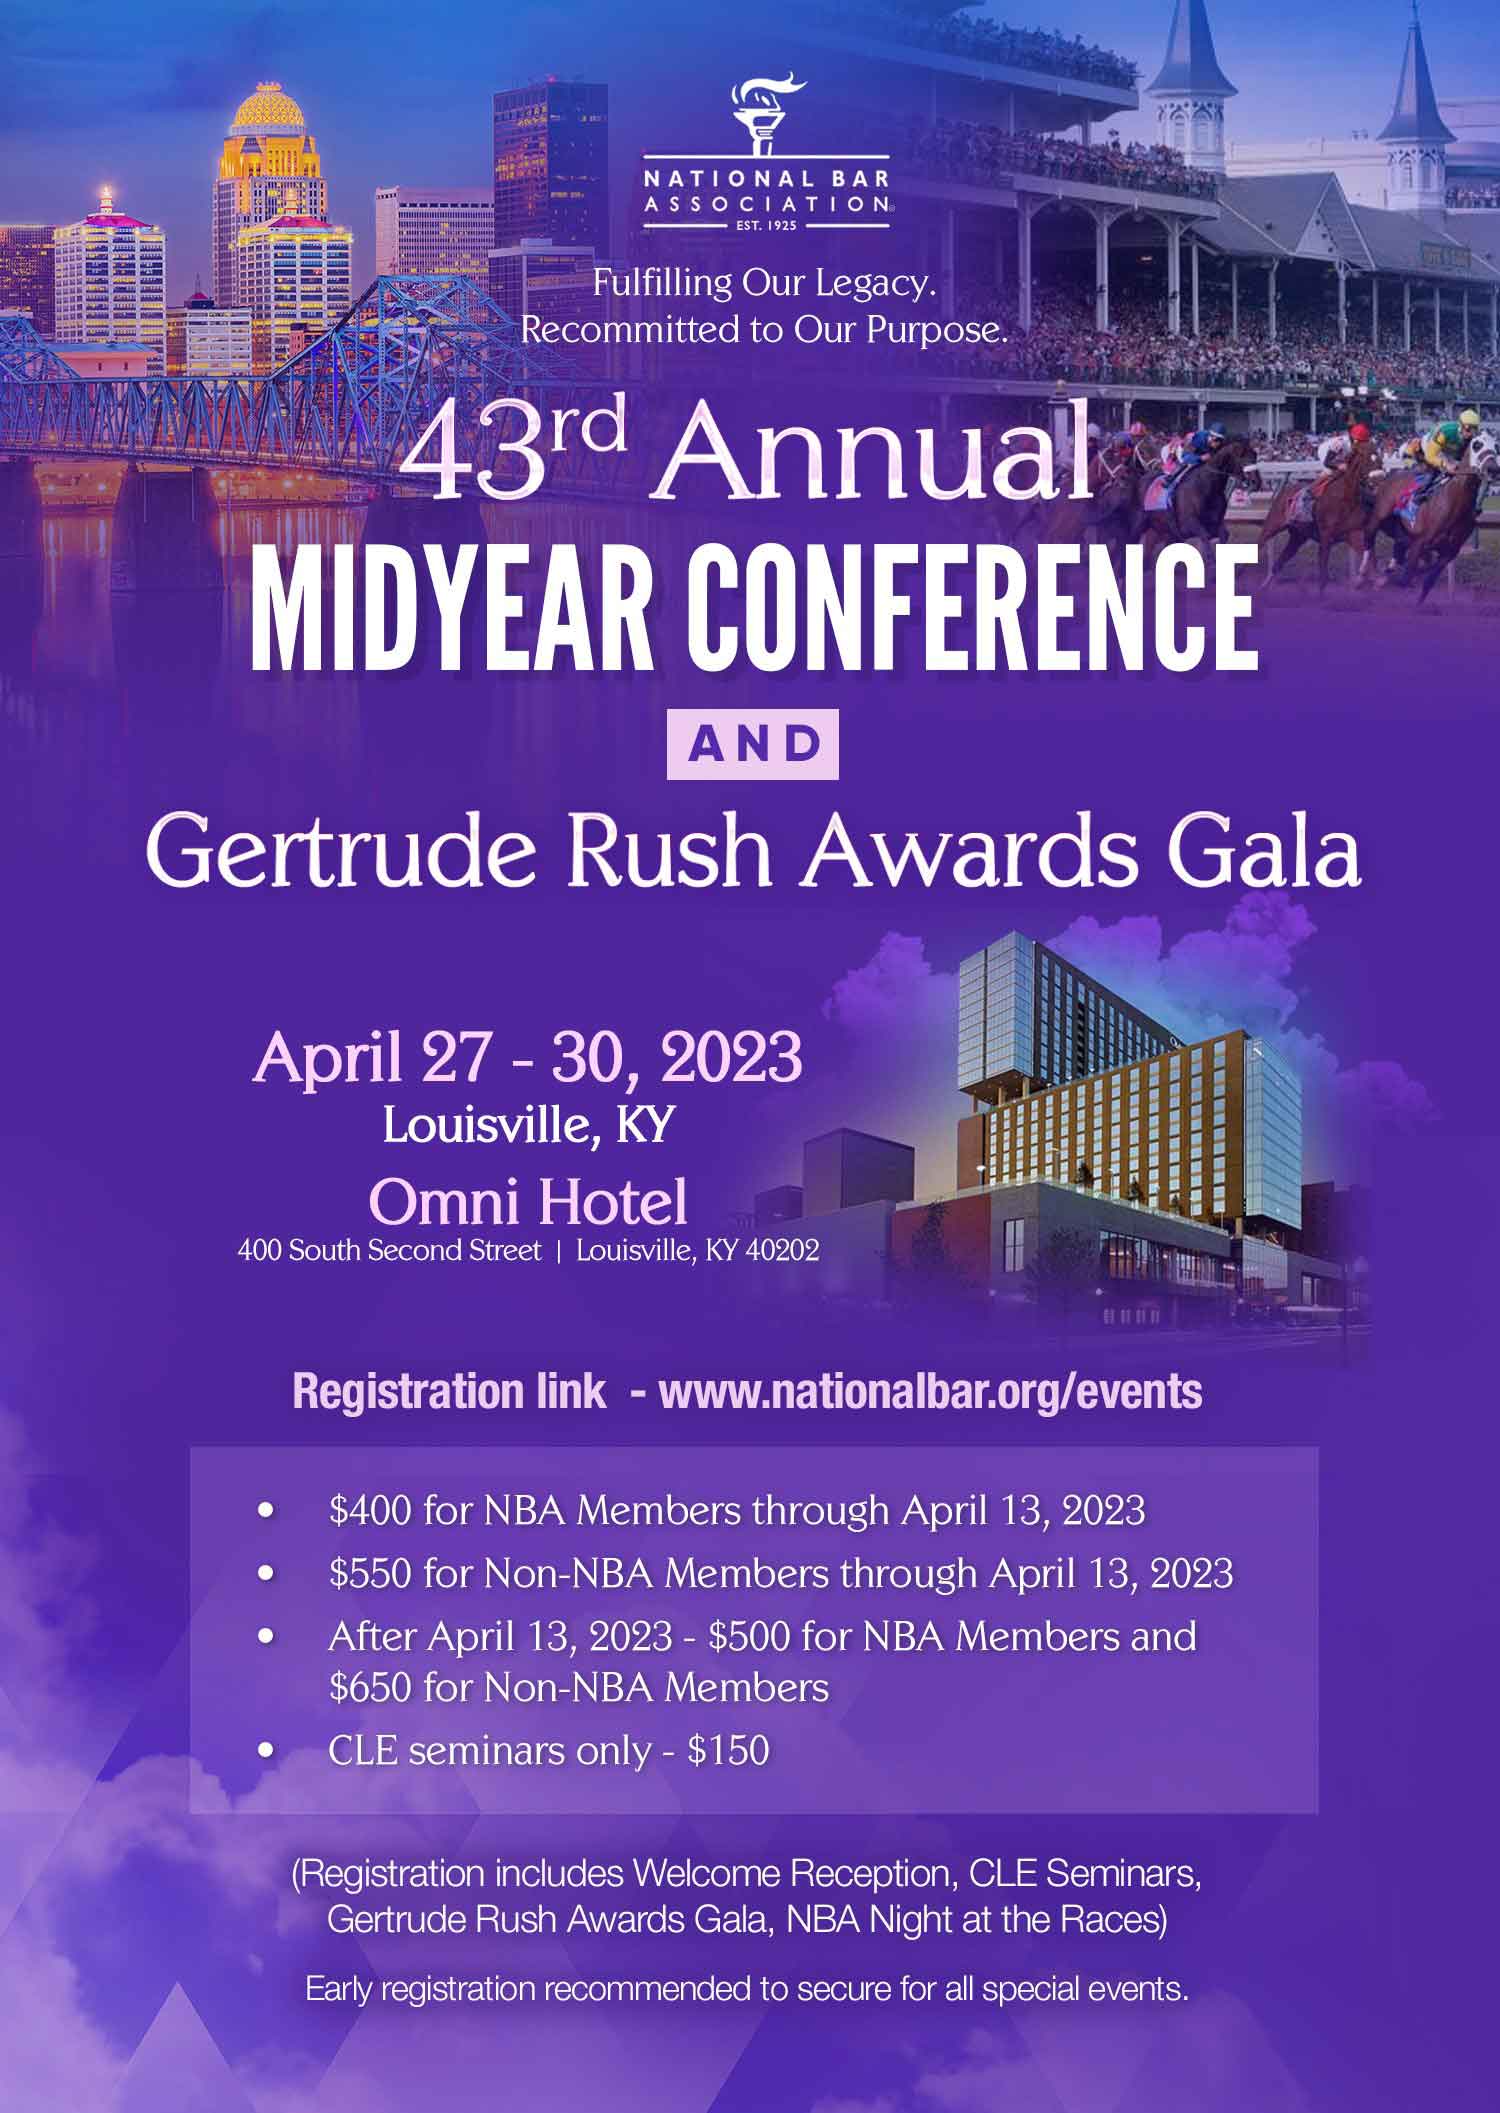 43rd Annual Midyear Conference & Gertrude Rush Awards Gala